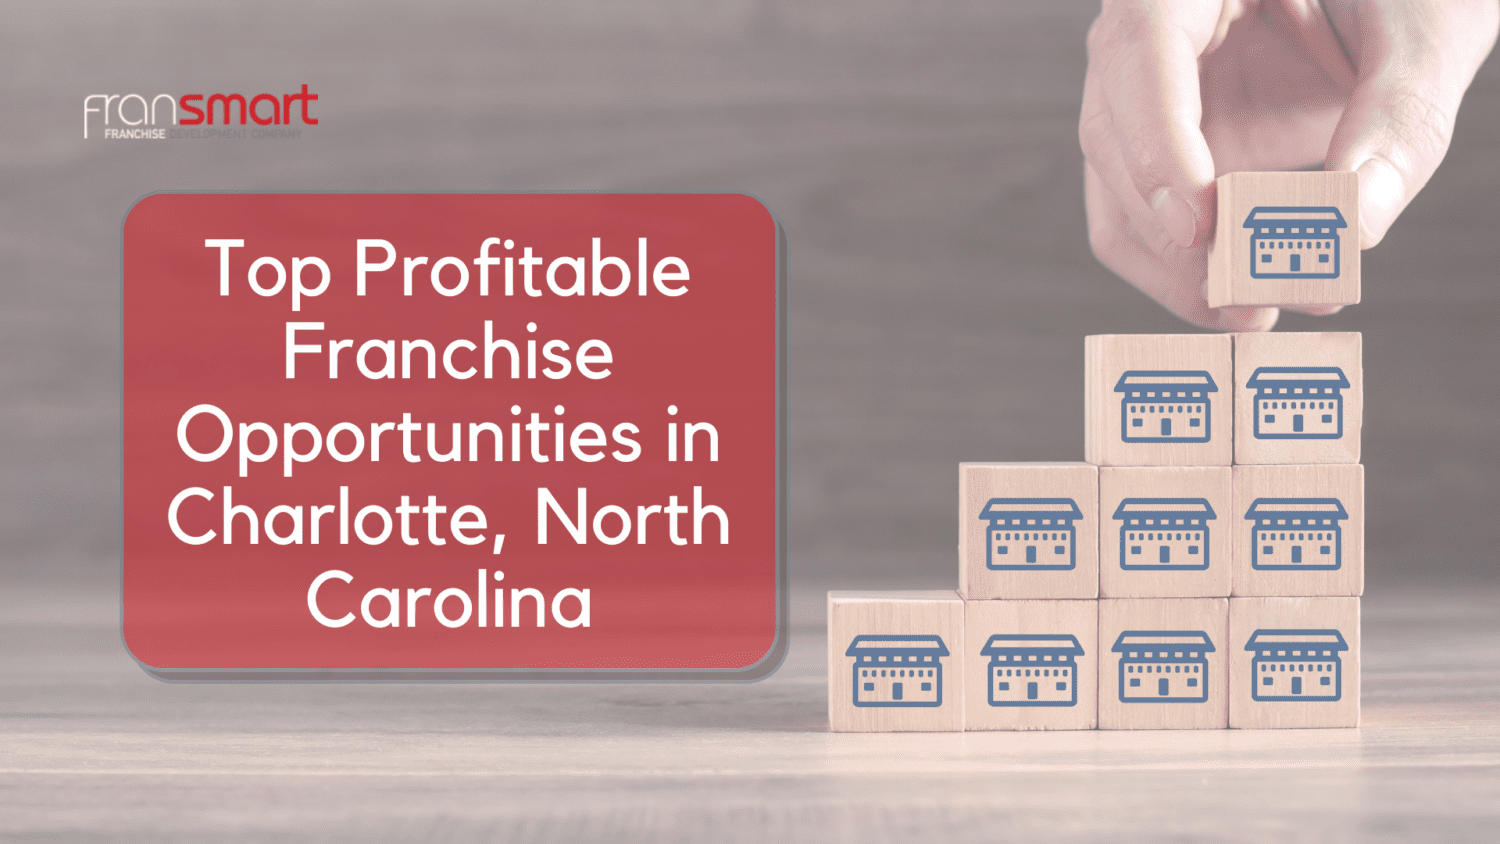 Top 5 Profitable Franchise Opportunities in Charlotte, North Carolina